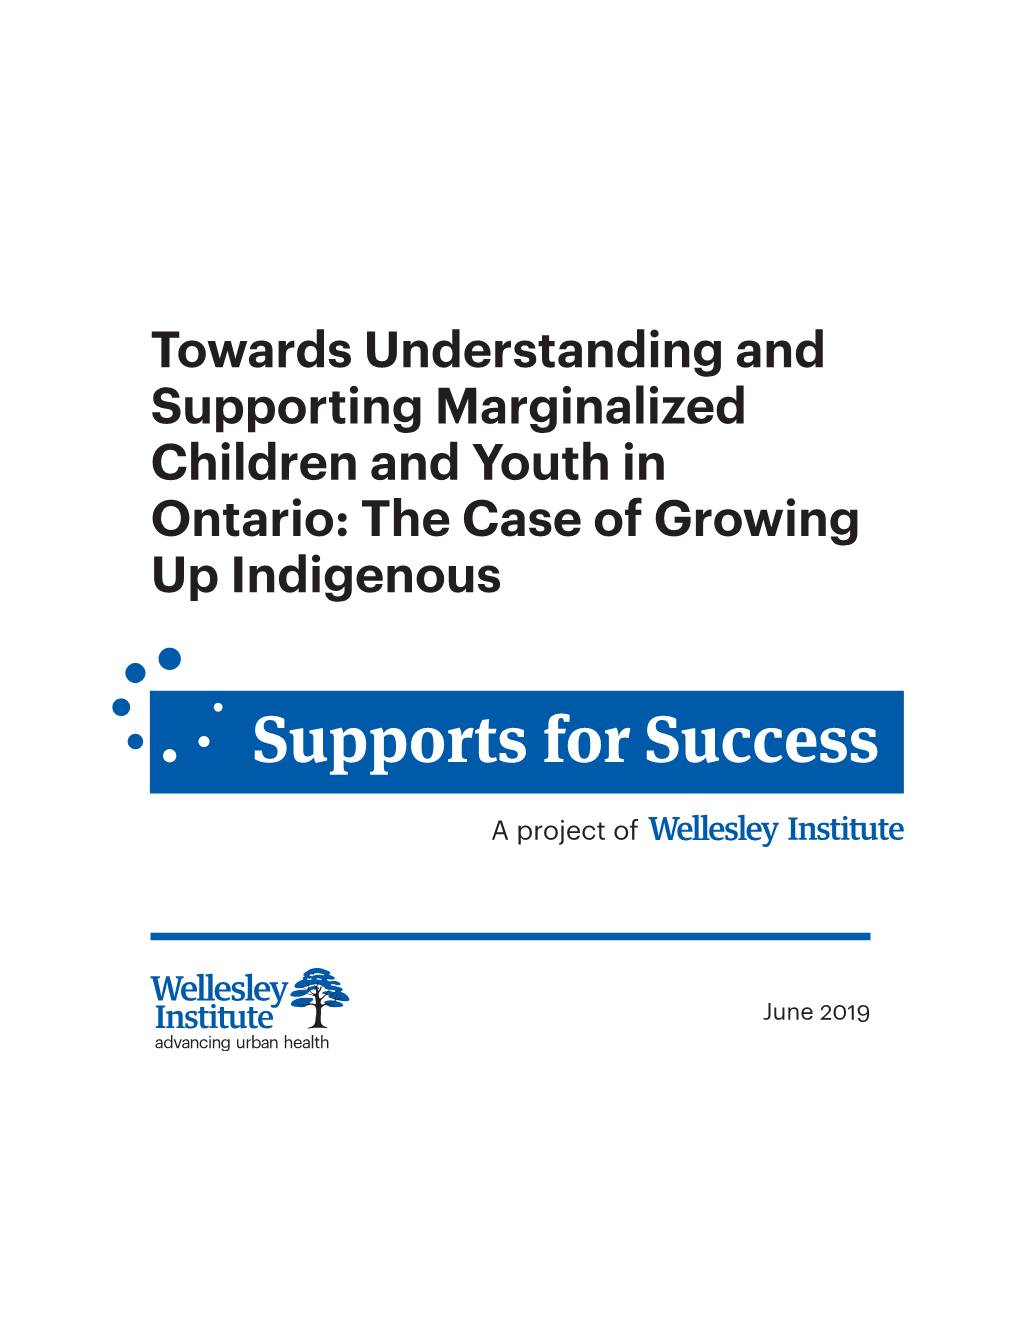 Towards Understanding and Supporting Marginalized Children and Youth in Ontario: the Case of Growing up Indigenous